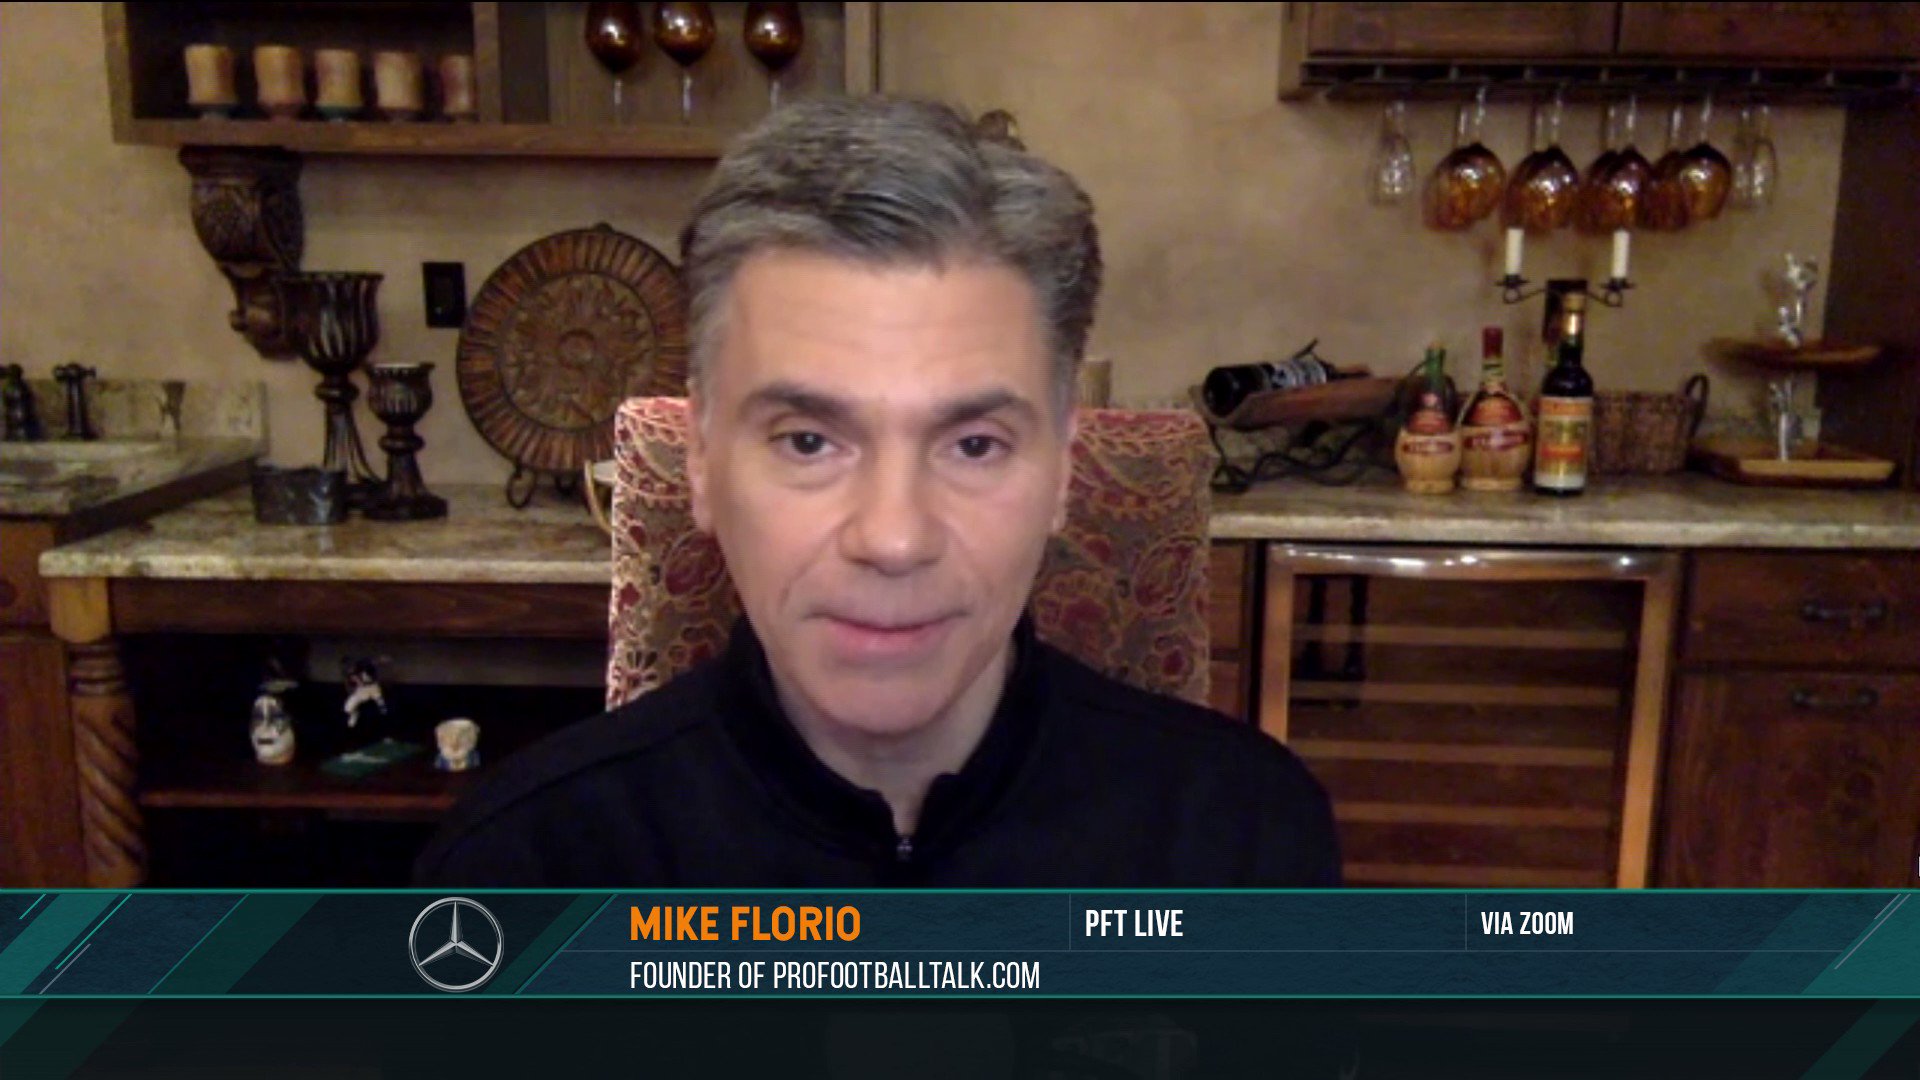 Dan Patrick Show on X: Mike Florio (@ProFootballTalk) says he expects the  #NFL to move to an 18 game regular season schedule by no later than 2030.  Here's why For Mike's full